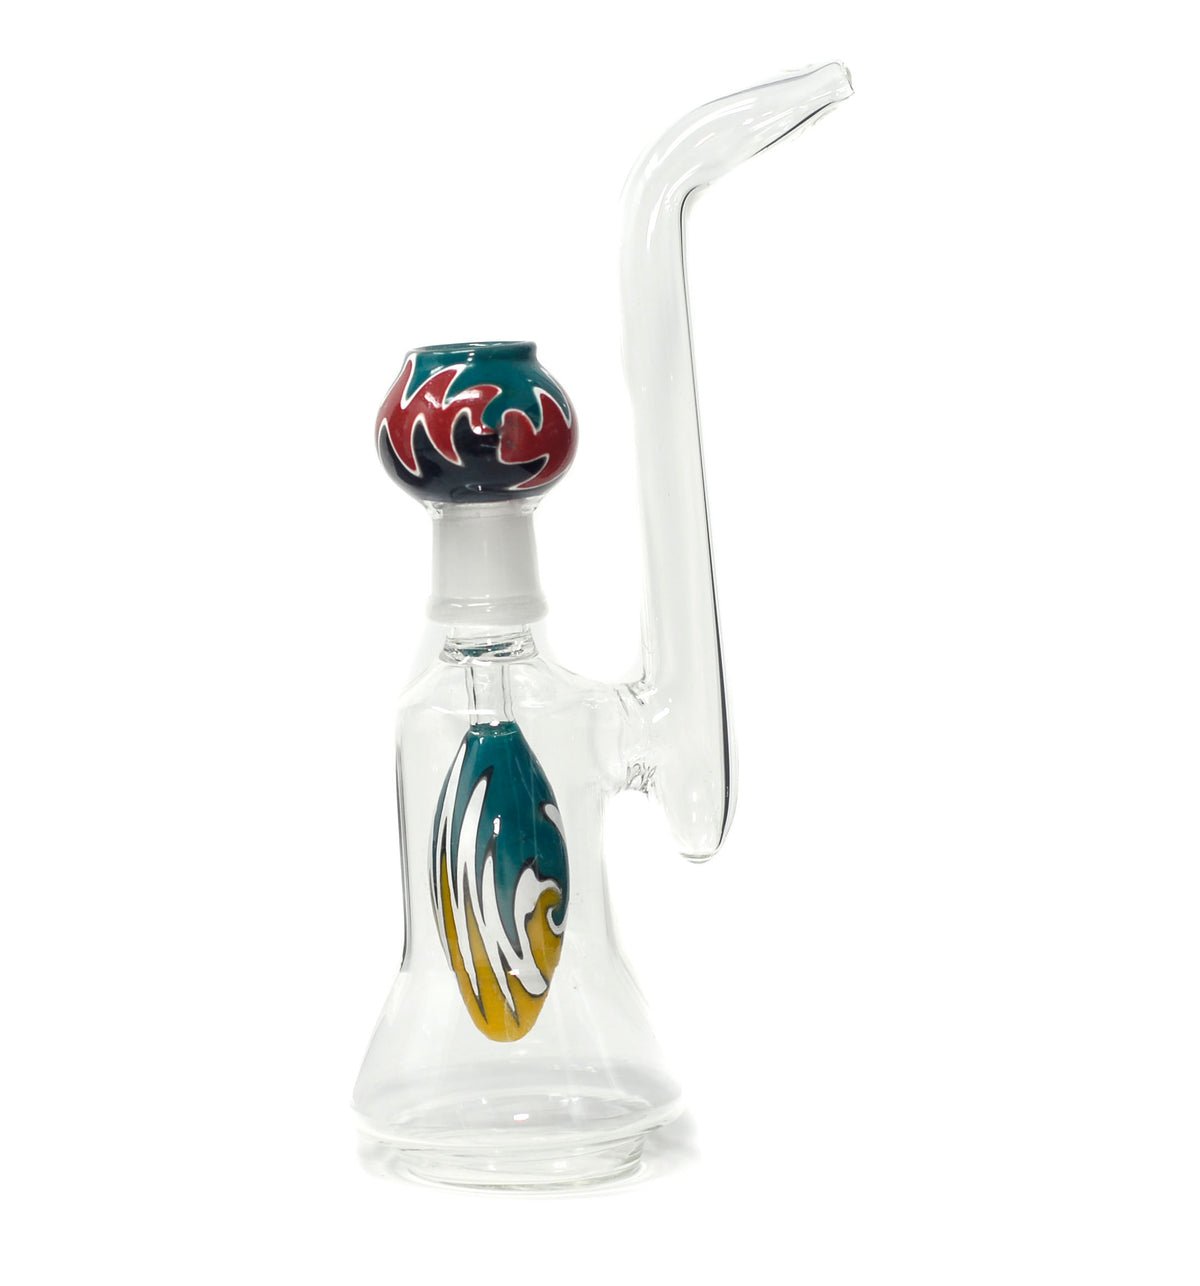 8" Glass on glass bubbler pipe